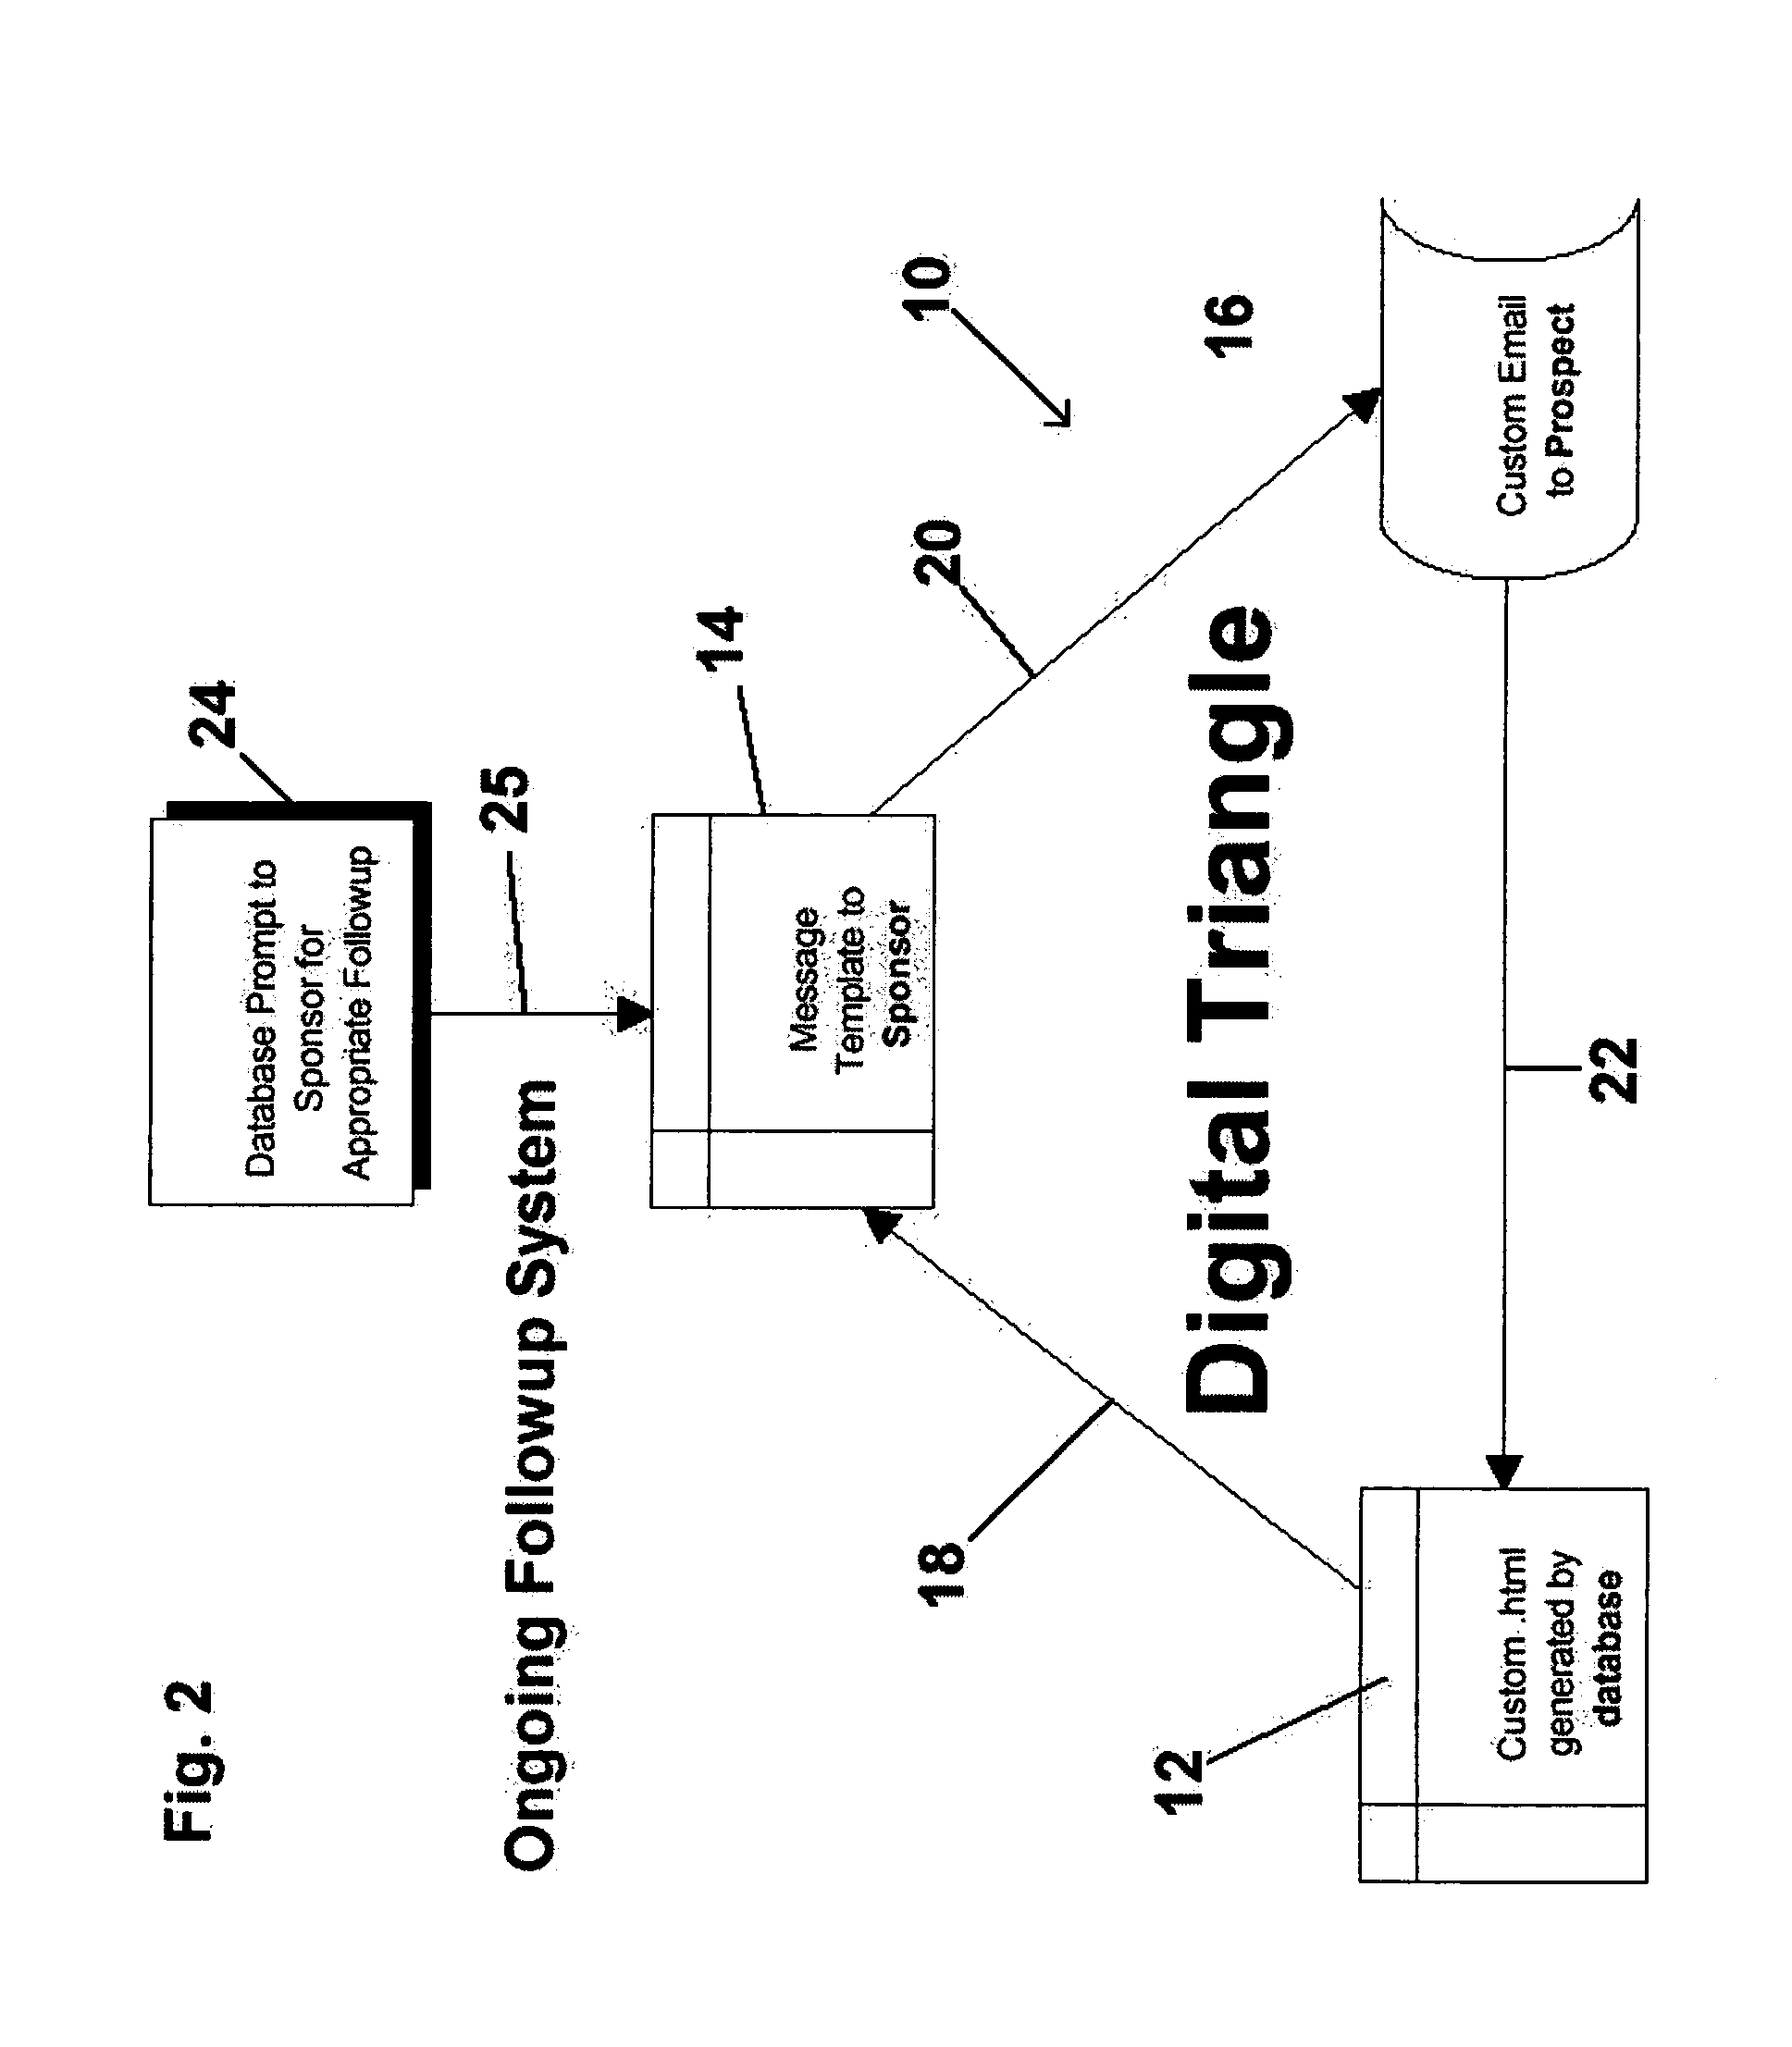 Method for automated electronic mail communication